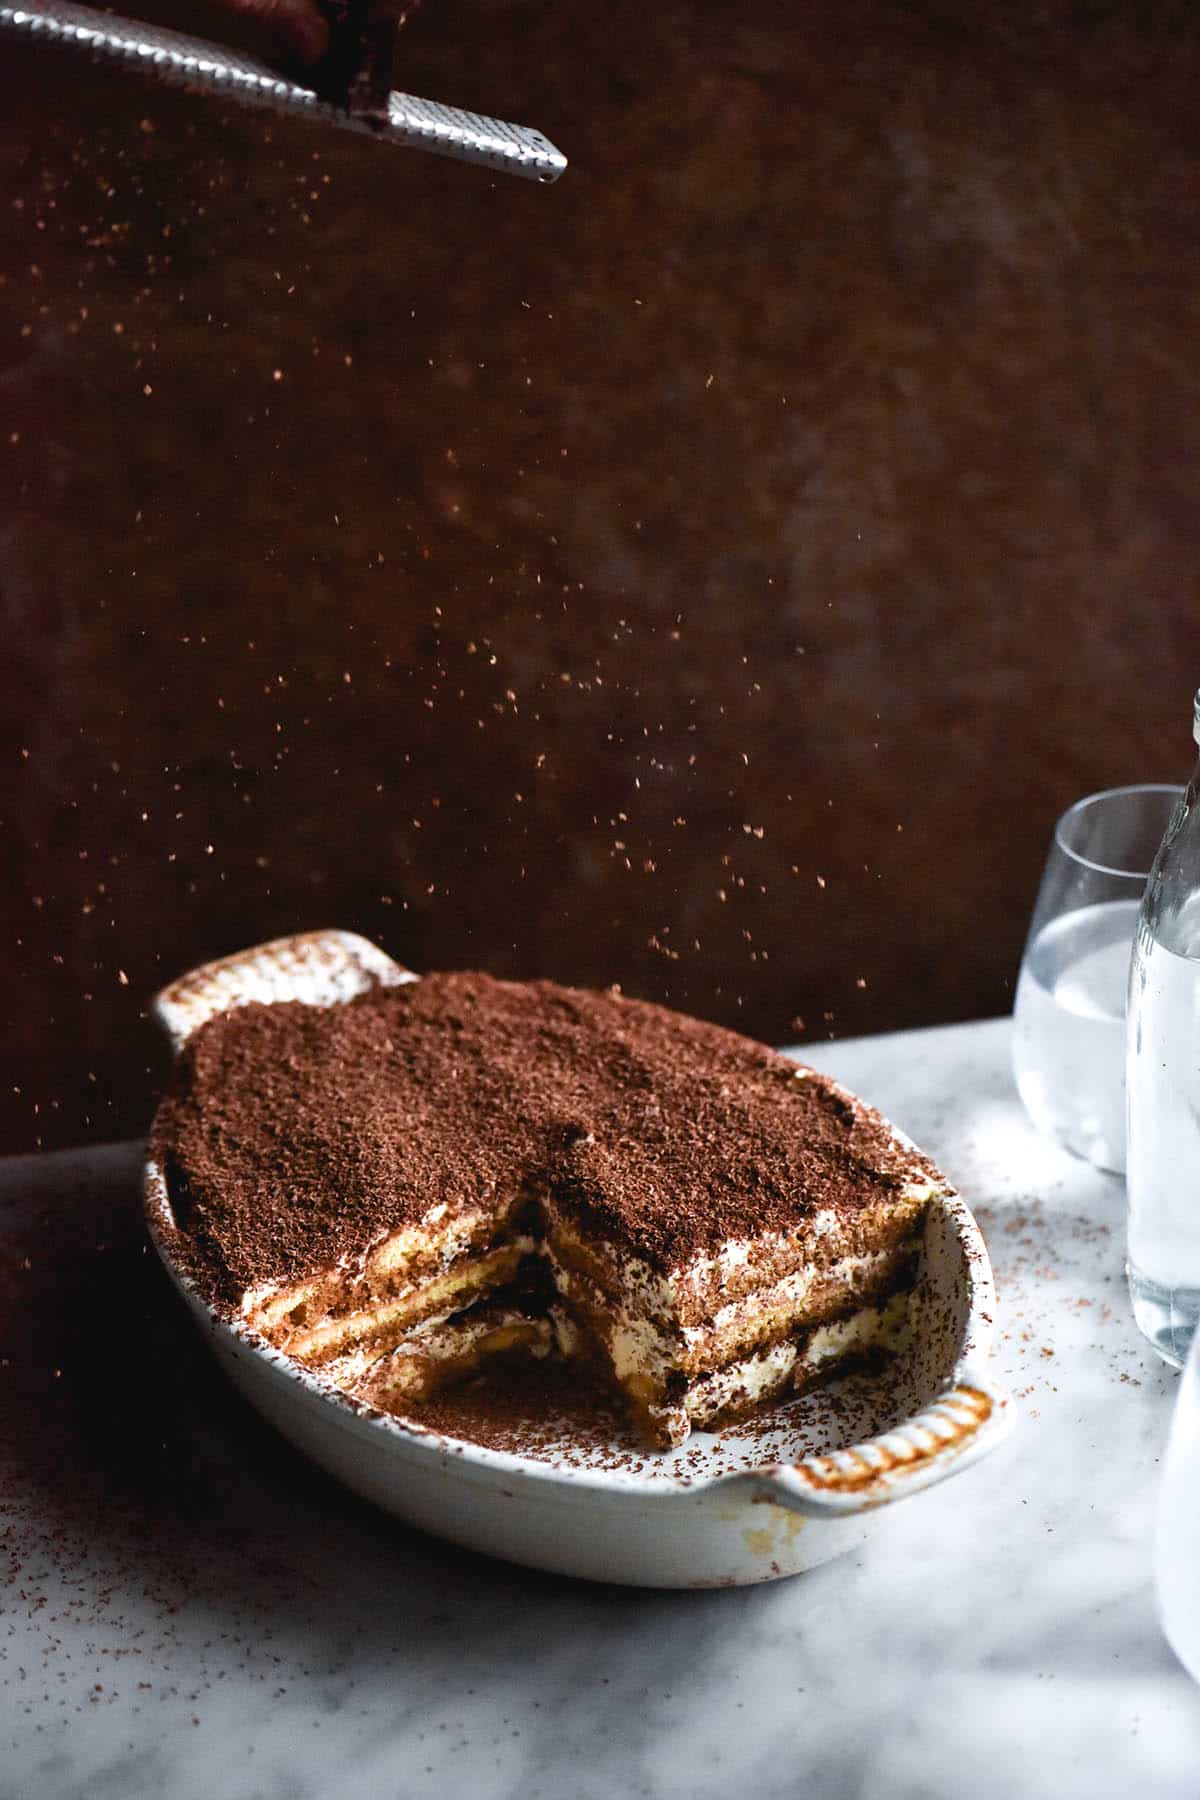 A side on view of a gluten free Tiramisu in an oval ceramic white baking dish. The dish sits on a white marble table against a black backdrop. Chocolate shavings fall from the microplane in the centre of the image down onto the Tiramisu